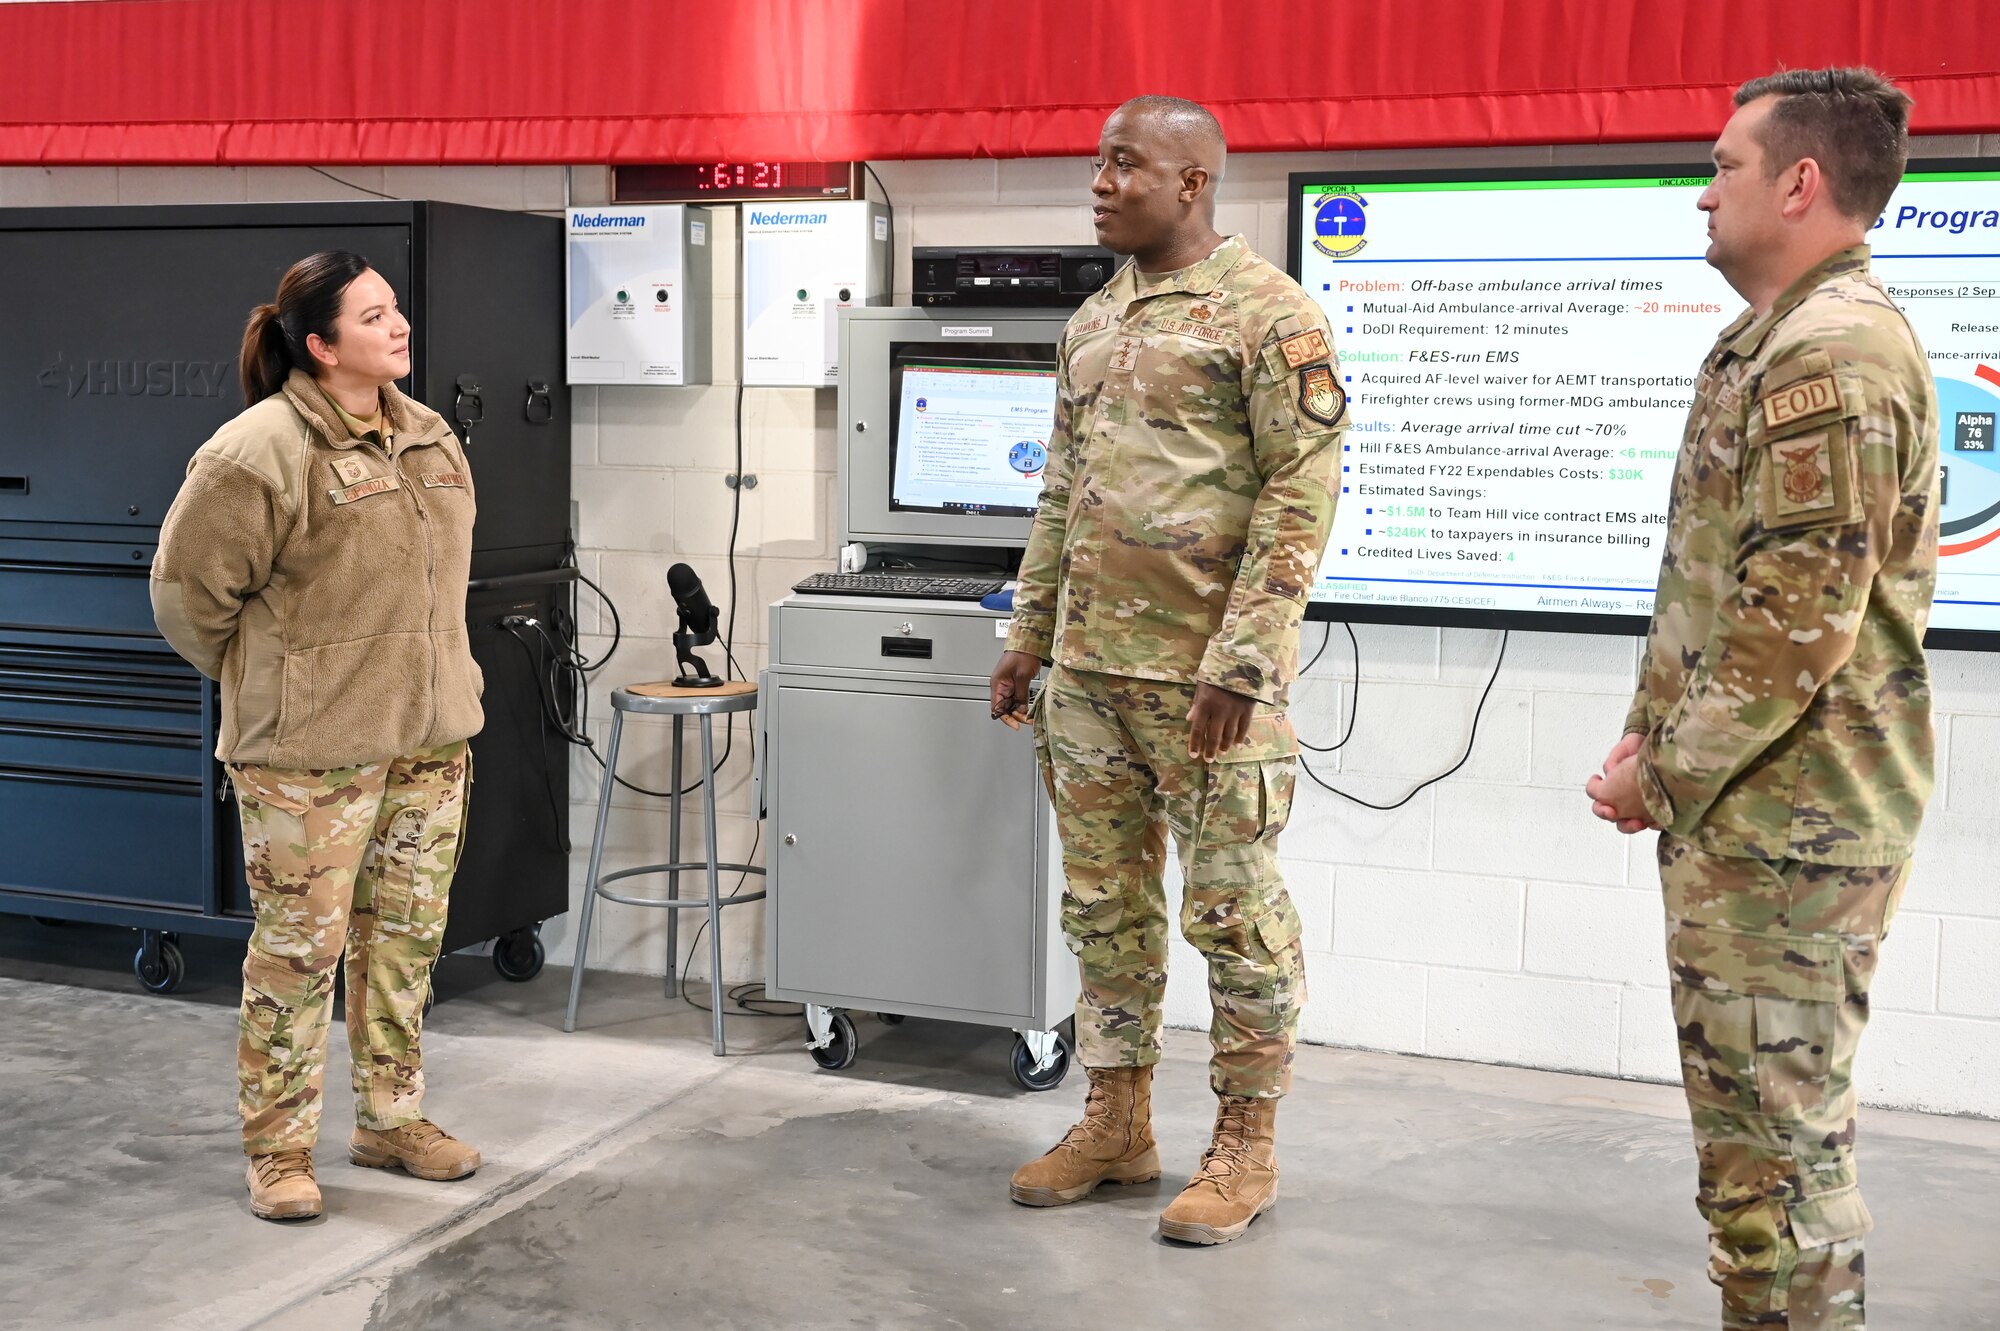 Senior Master Sgt. Vanessa Espinoza (left), 775th Fire & Emergency Services deputy fire chief, addressed Lt. Gen. Stacey Hawkins (center), Air Force Sustainment Center commander, and Lt. Col. Daniel Long, 775th Civil Engineering Squadron commander, during a base visit at the fire station Nov. 14, 2022, at Hill Air Force Base, Utah. (U.S. Air Force photo by Cynthia Griggs)